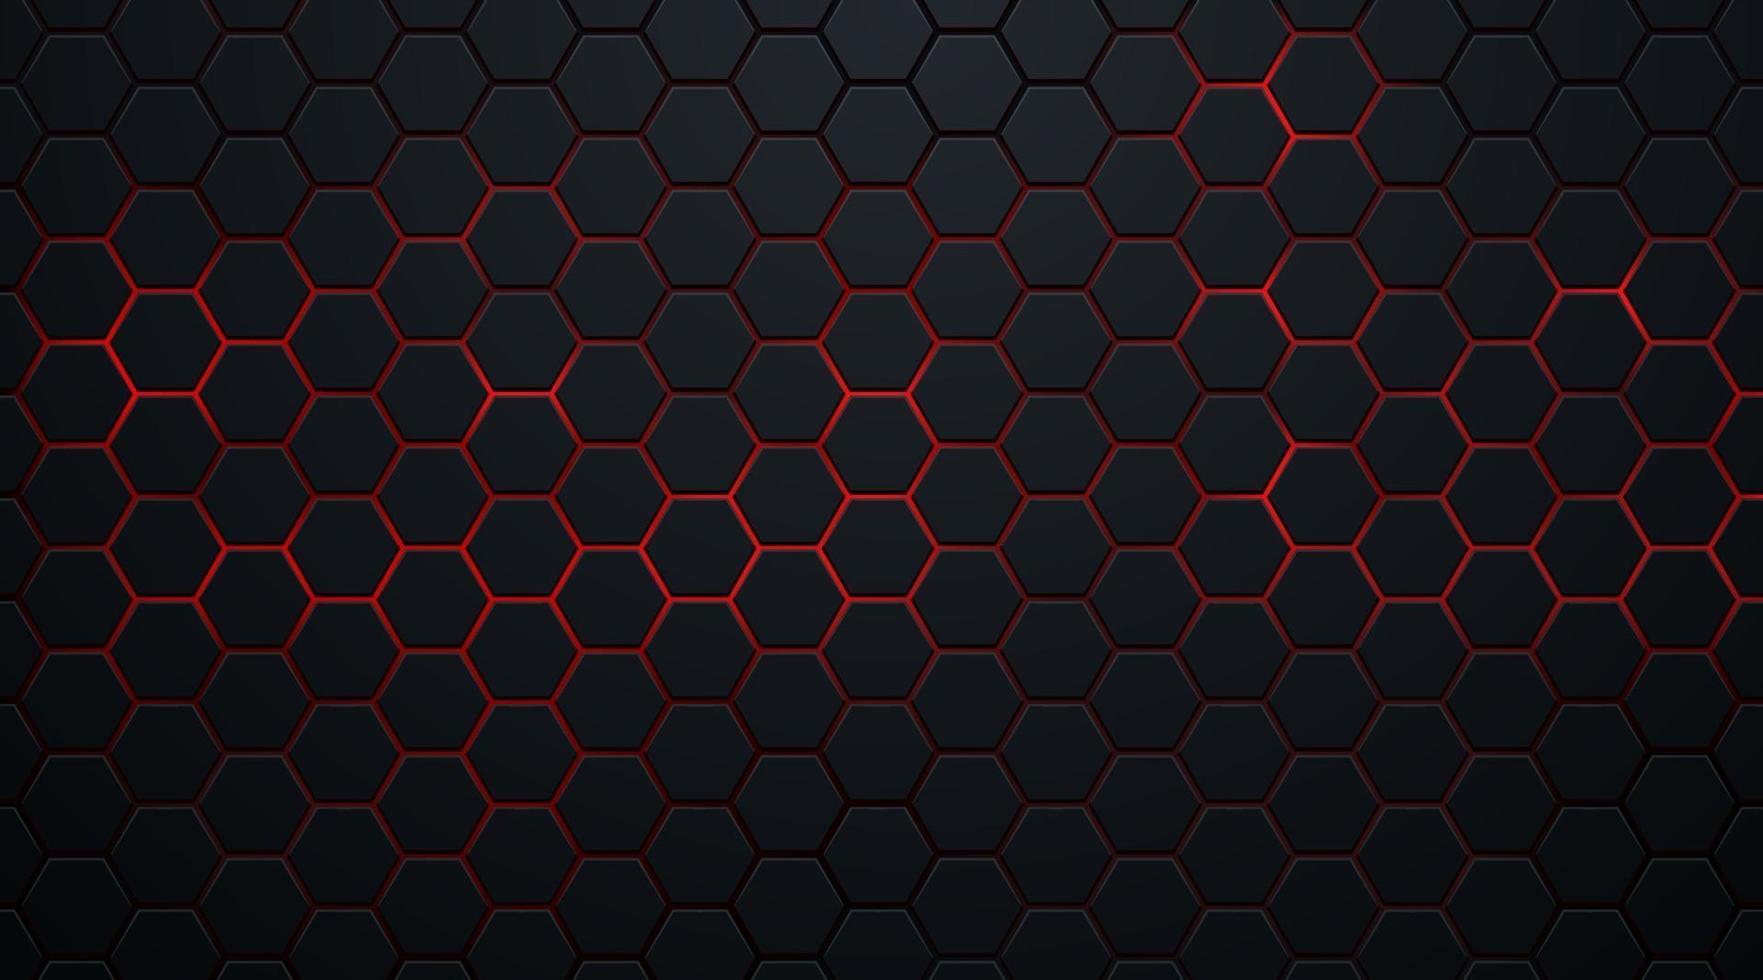 Abstract dark hexagon pattern on red neon background technology style. Modern futuristic geometric shape web banner design. You can use for cover template, poster, flyer, print ad. Vector illustration